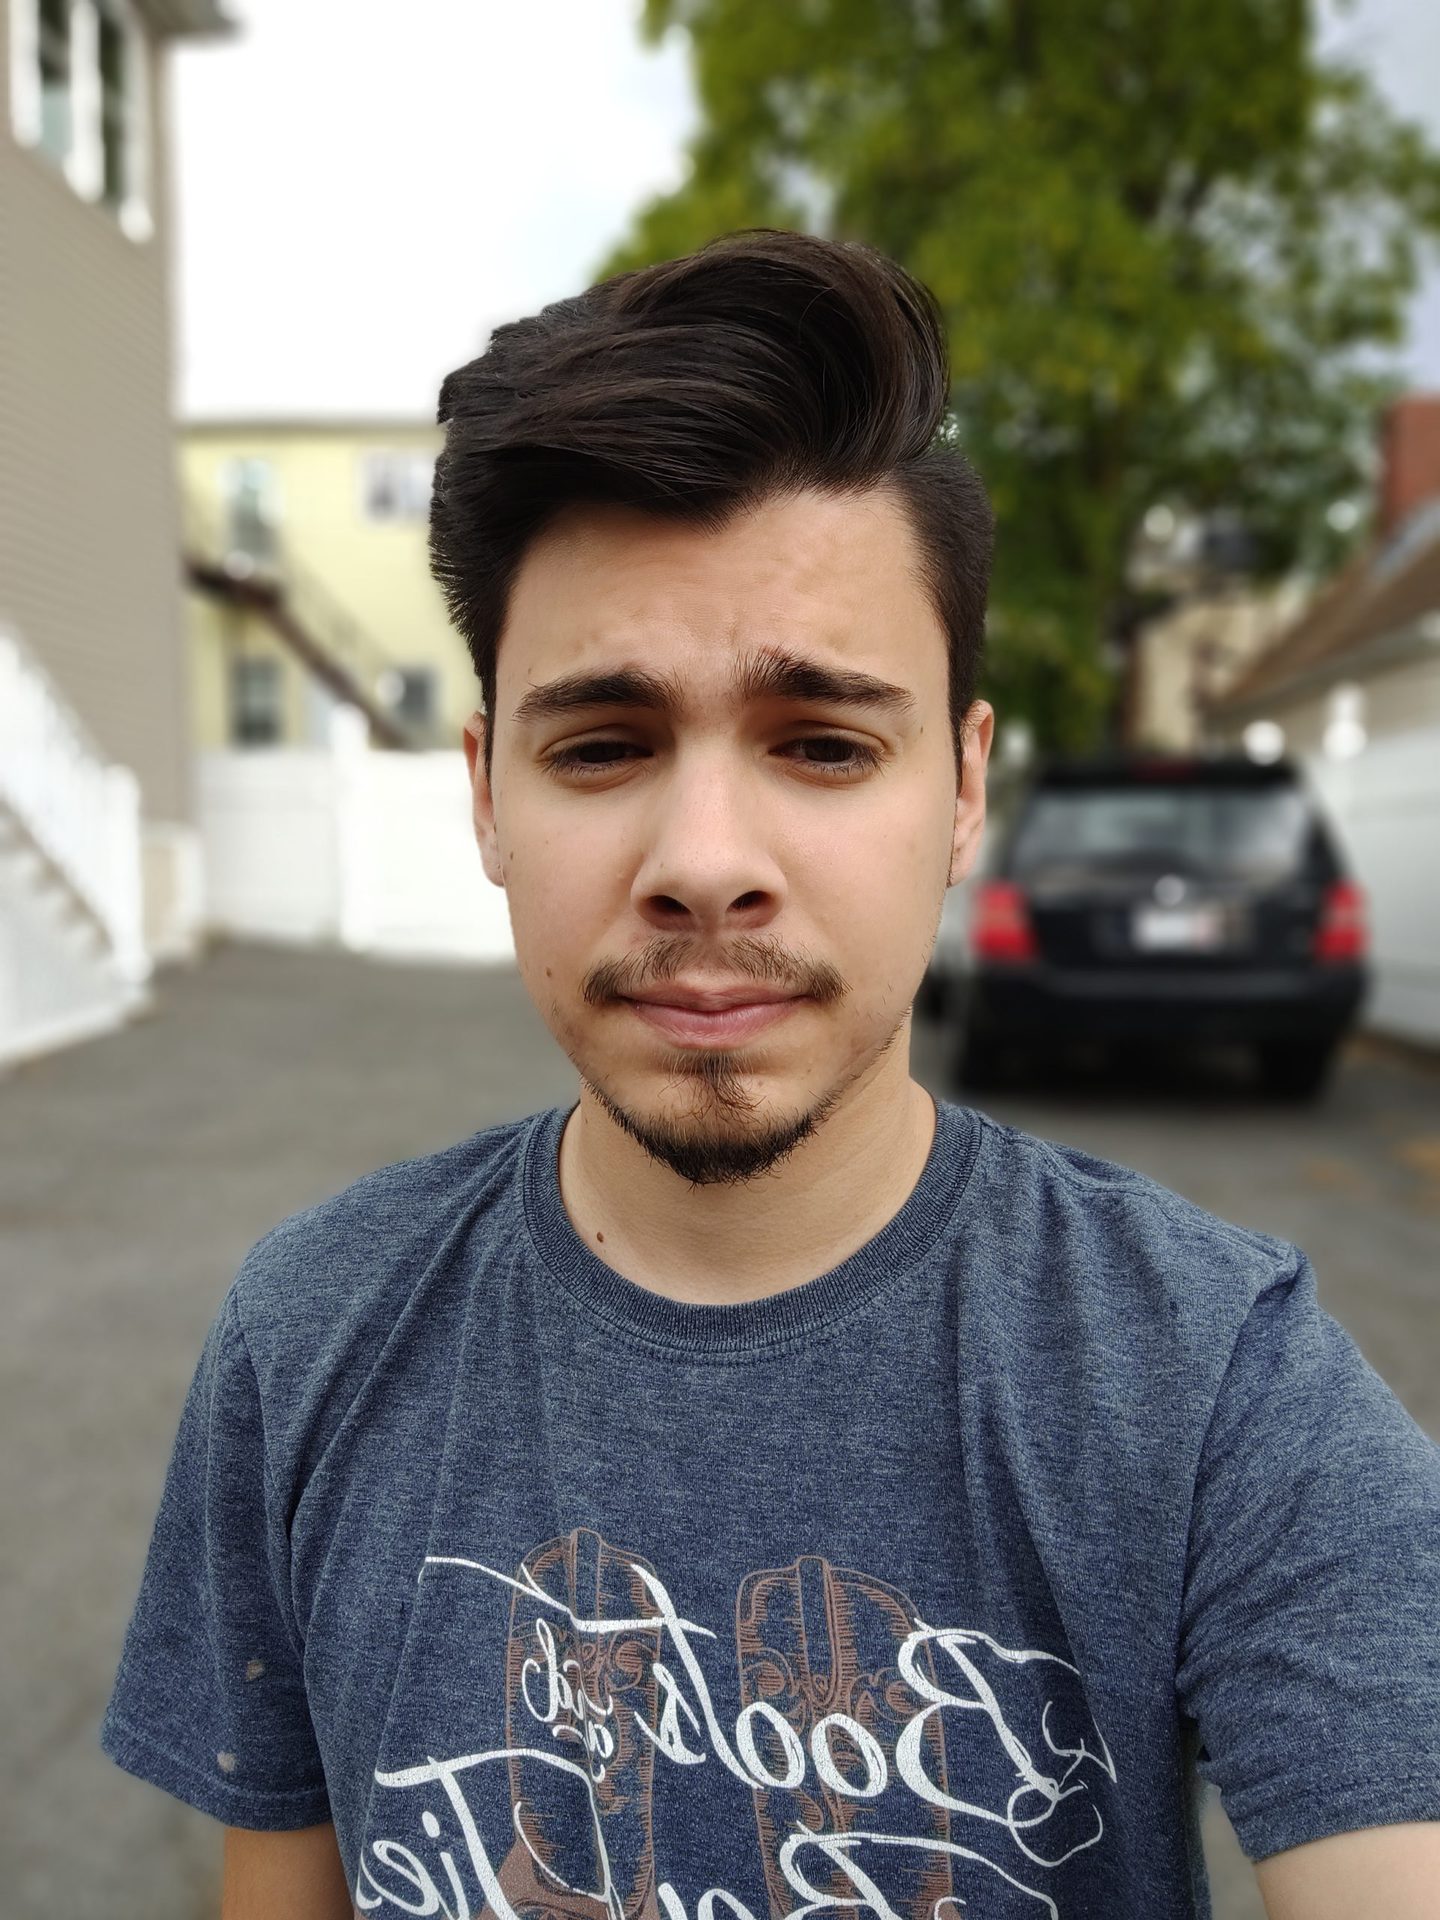 TCL 20 Pro 5G front-facing camera selfie shot of a dark-haired man in a gray tee outdoors in overcast lighting.